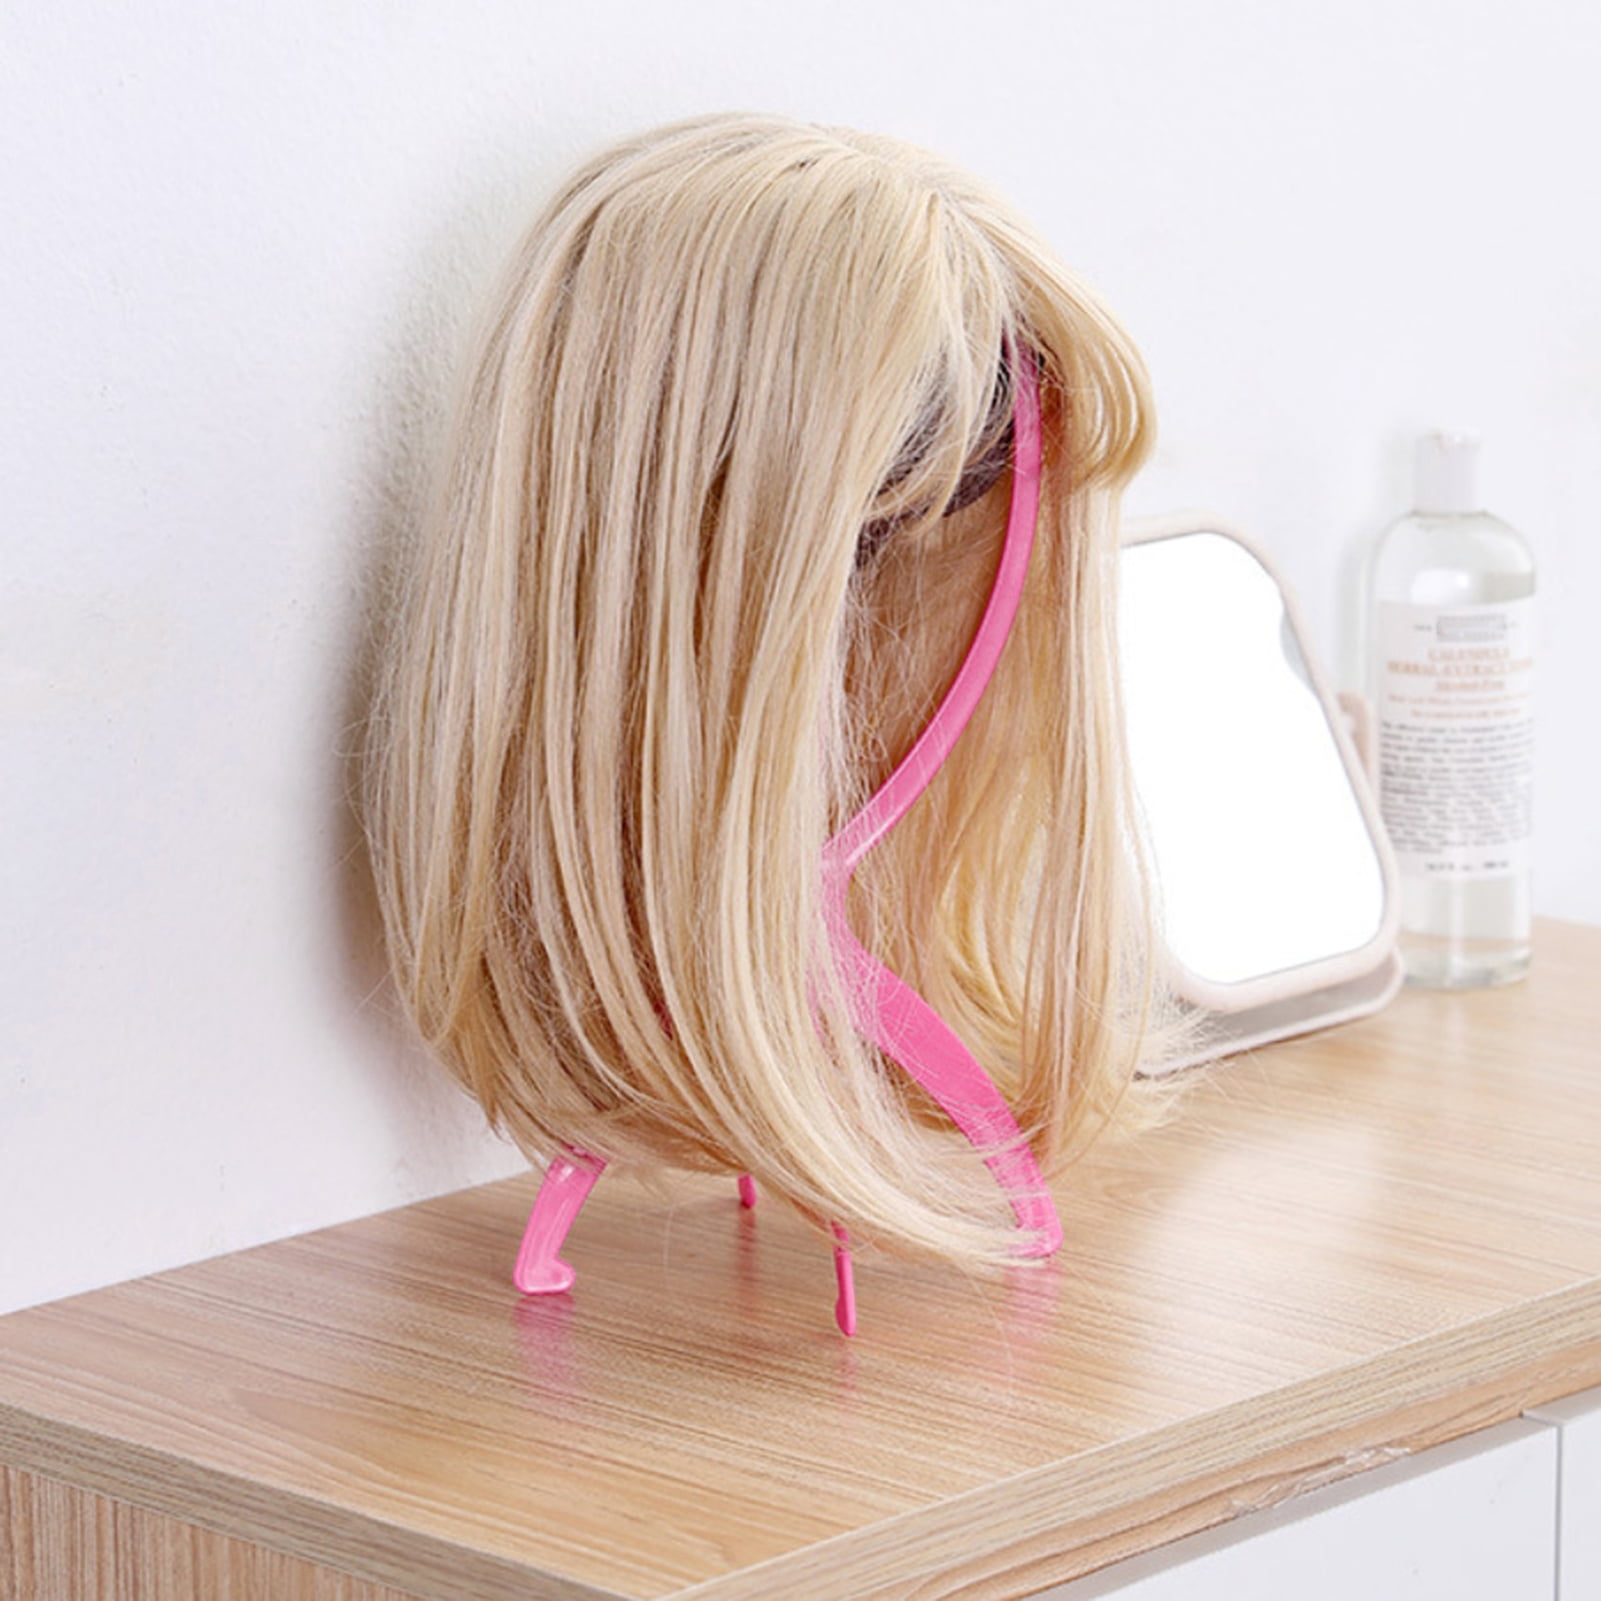 2Pcs Portable Wig Head Stand Holder Hair Styling Display Beauty